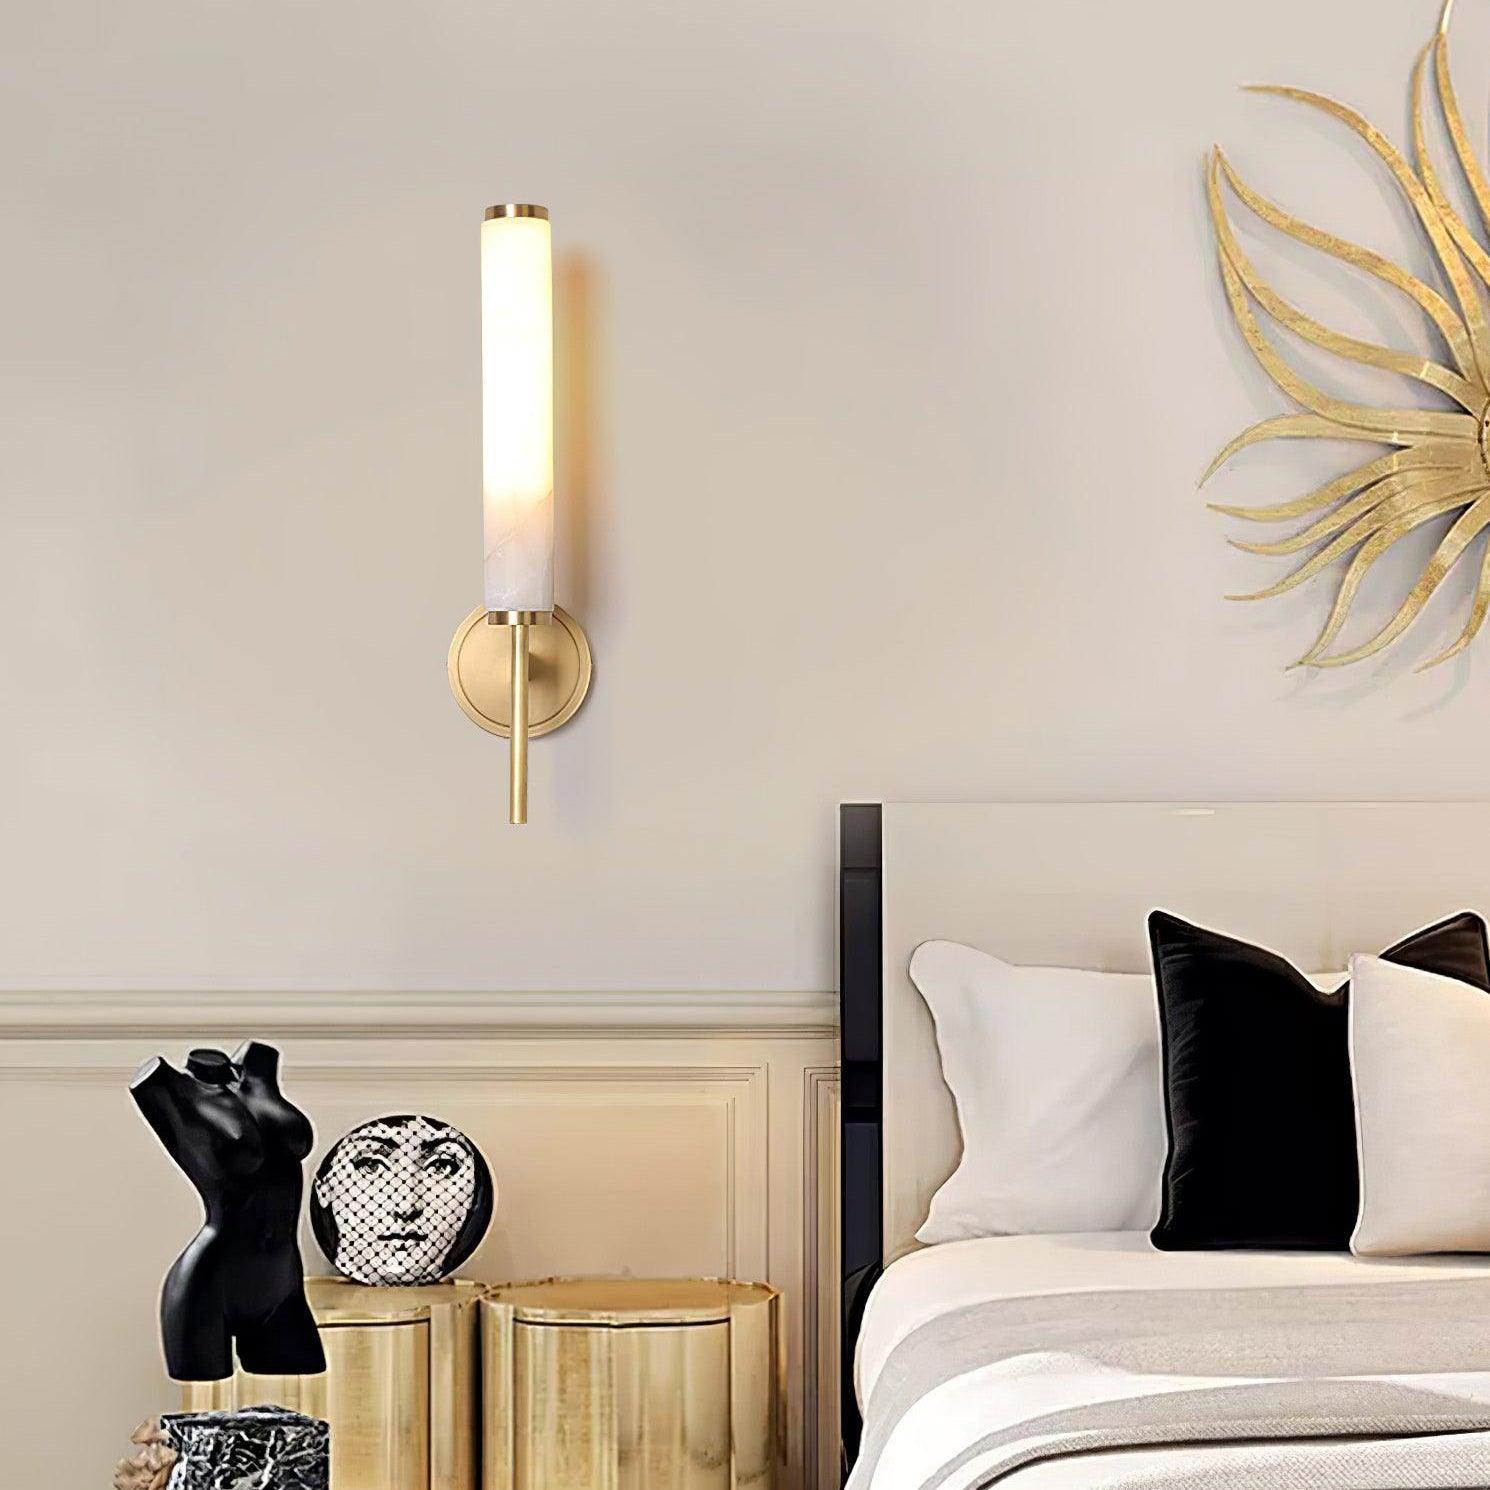 Budget-Friendly Sconce Lights: Elevate Your Space with Style – Vakkerlight